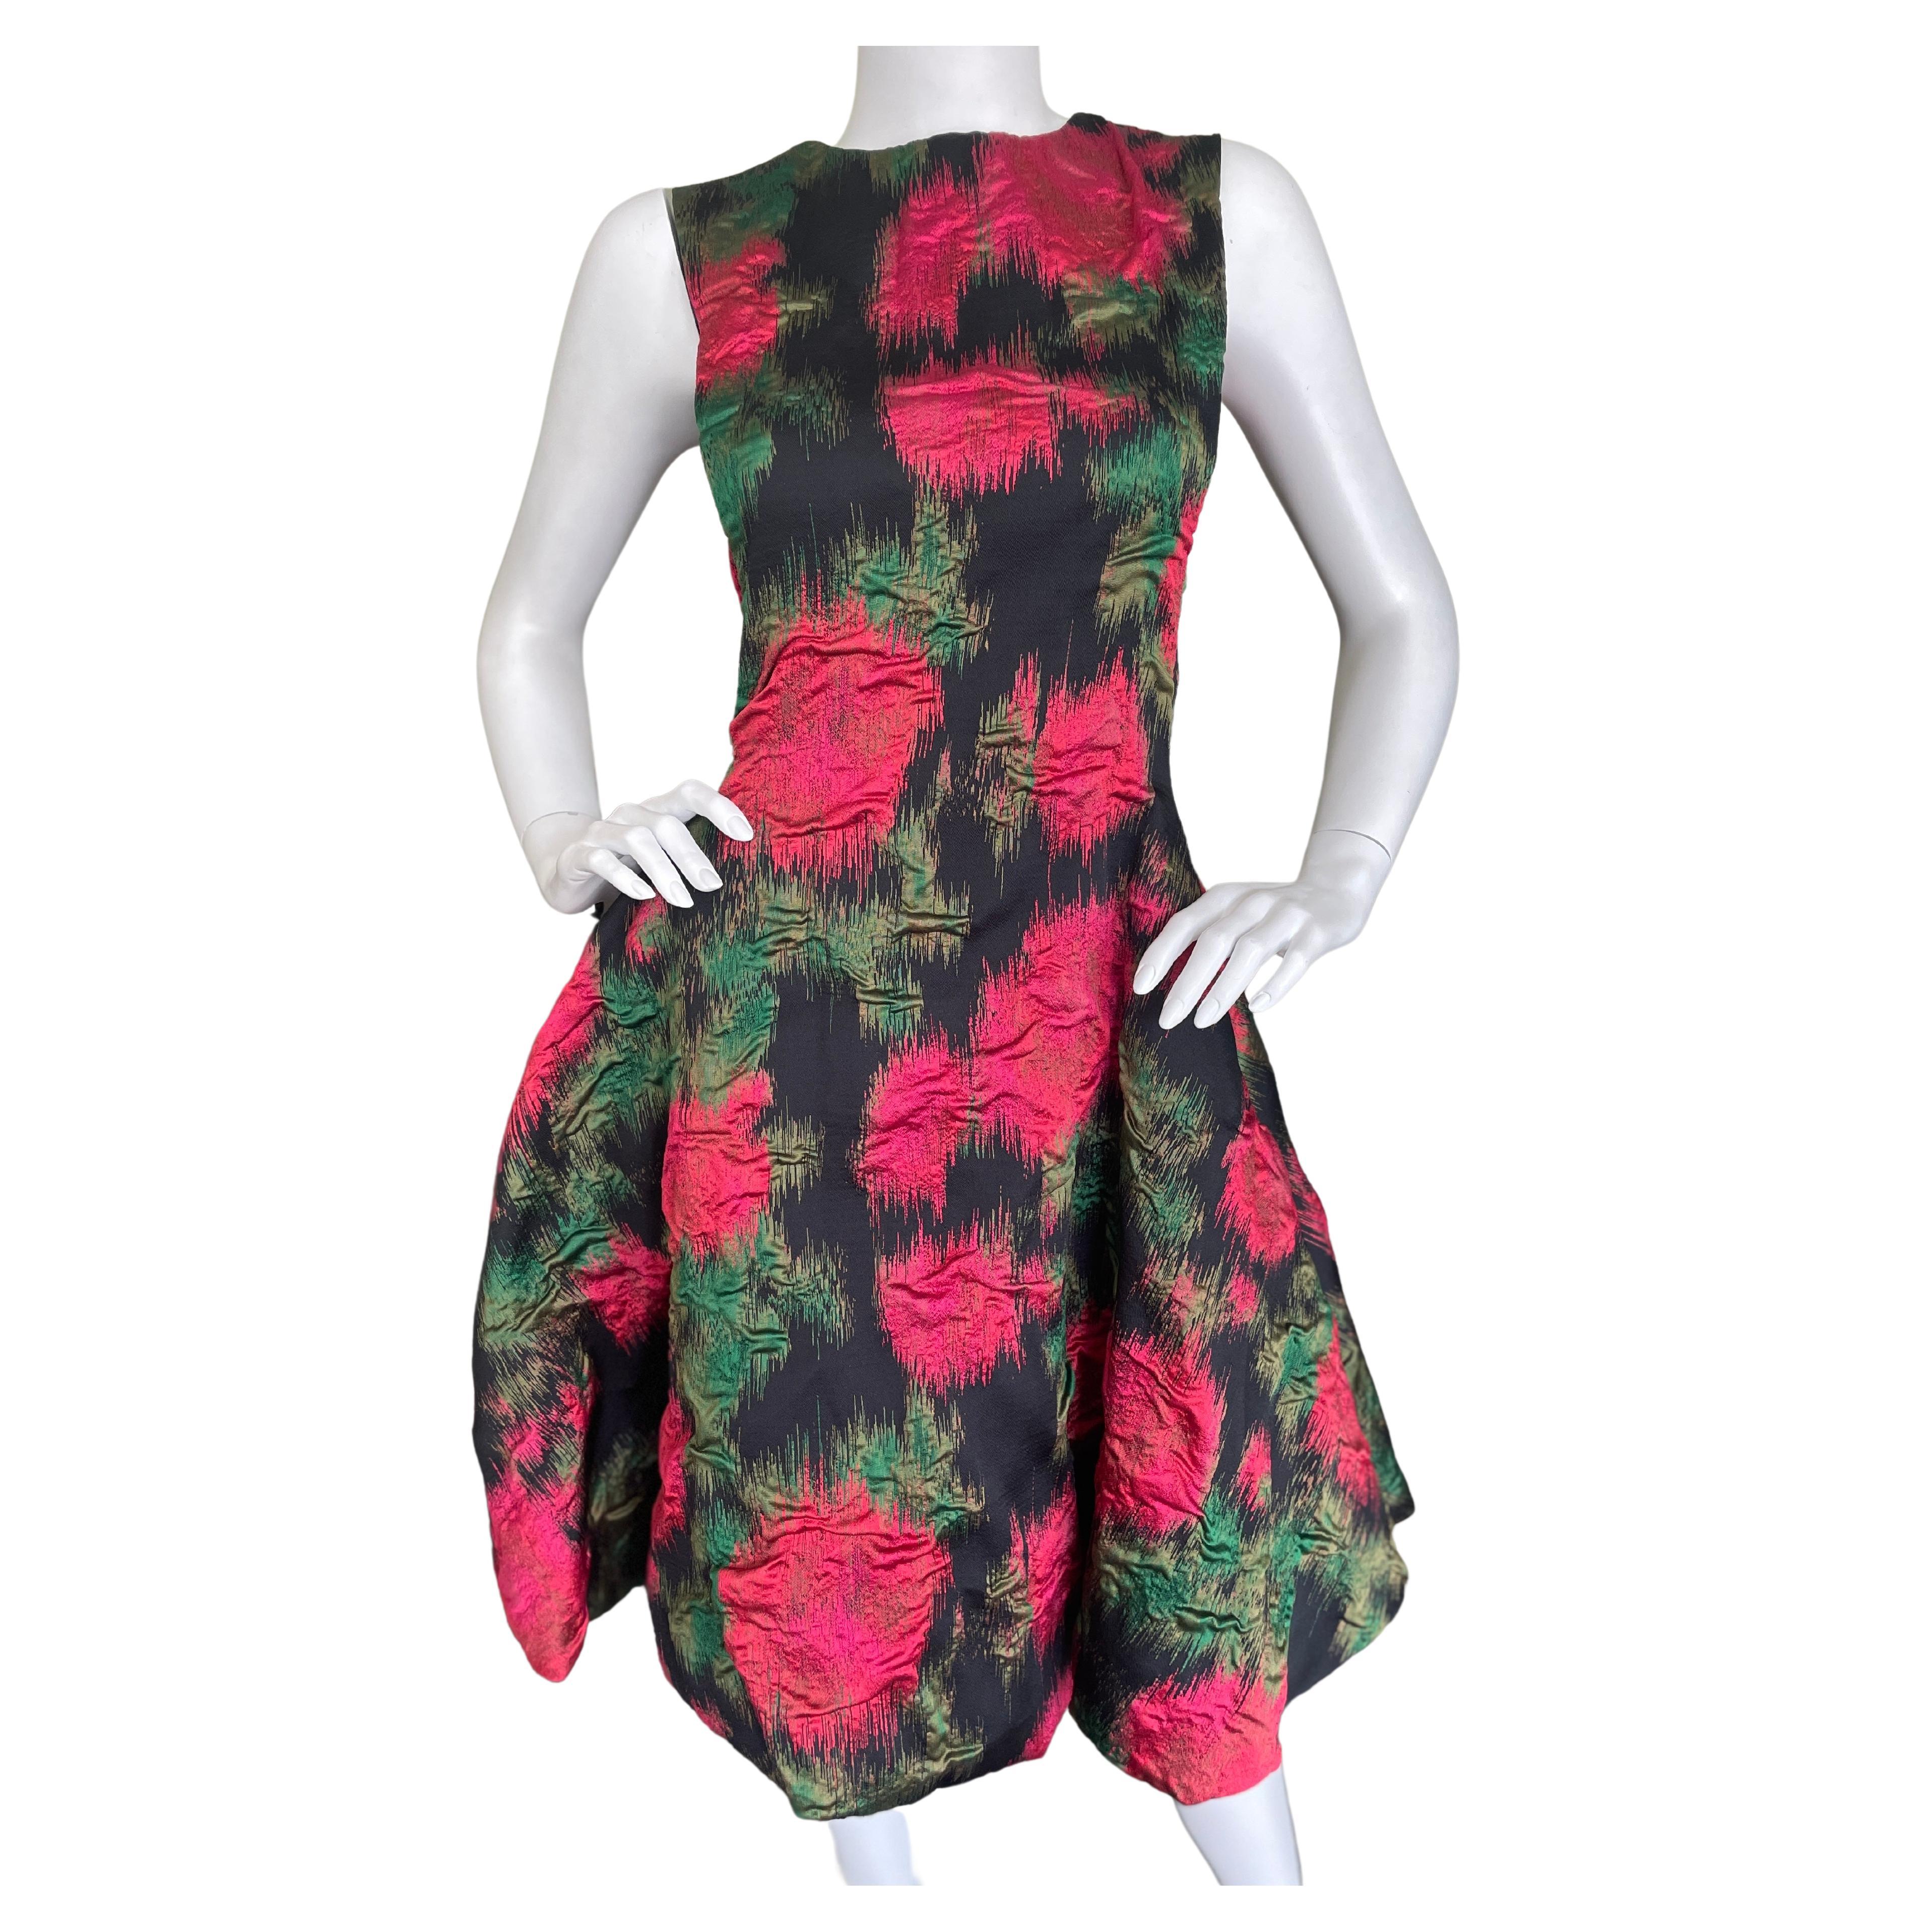 Lanvin by Alber Elbaz Textural Sleeveless Floral Print Cocktail Dress For Sale